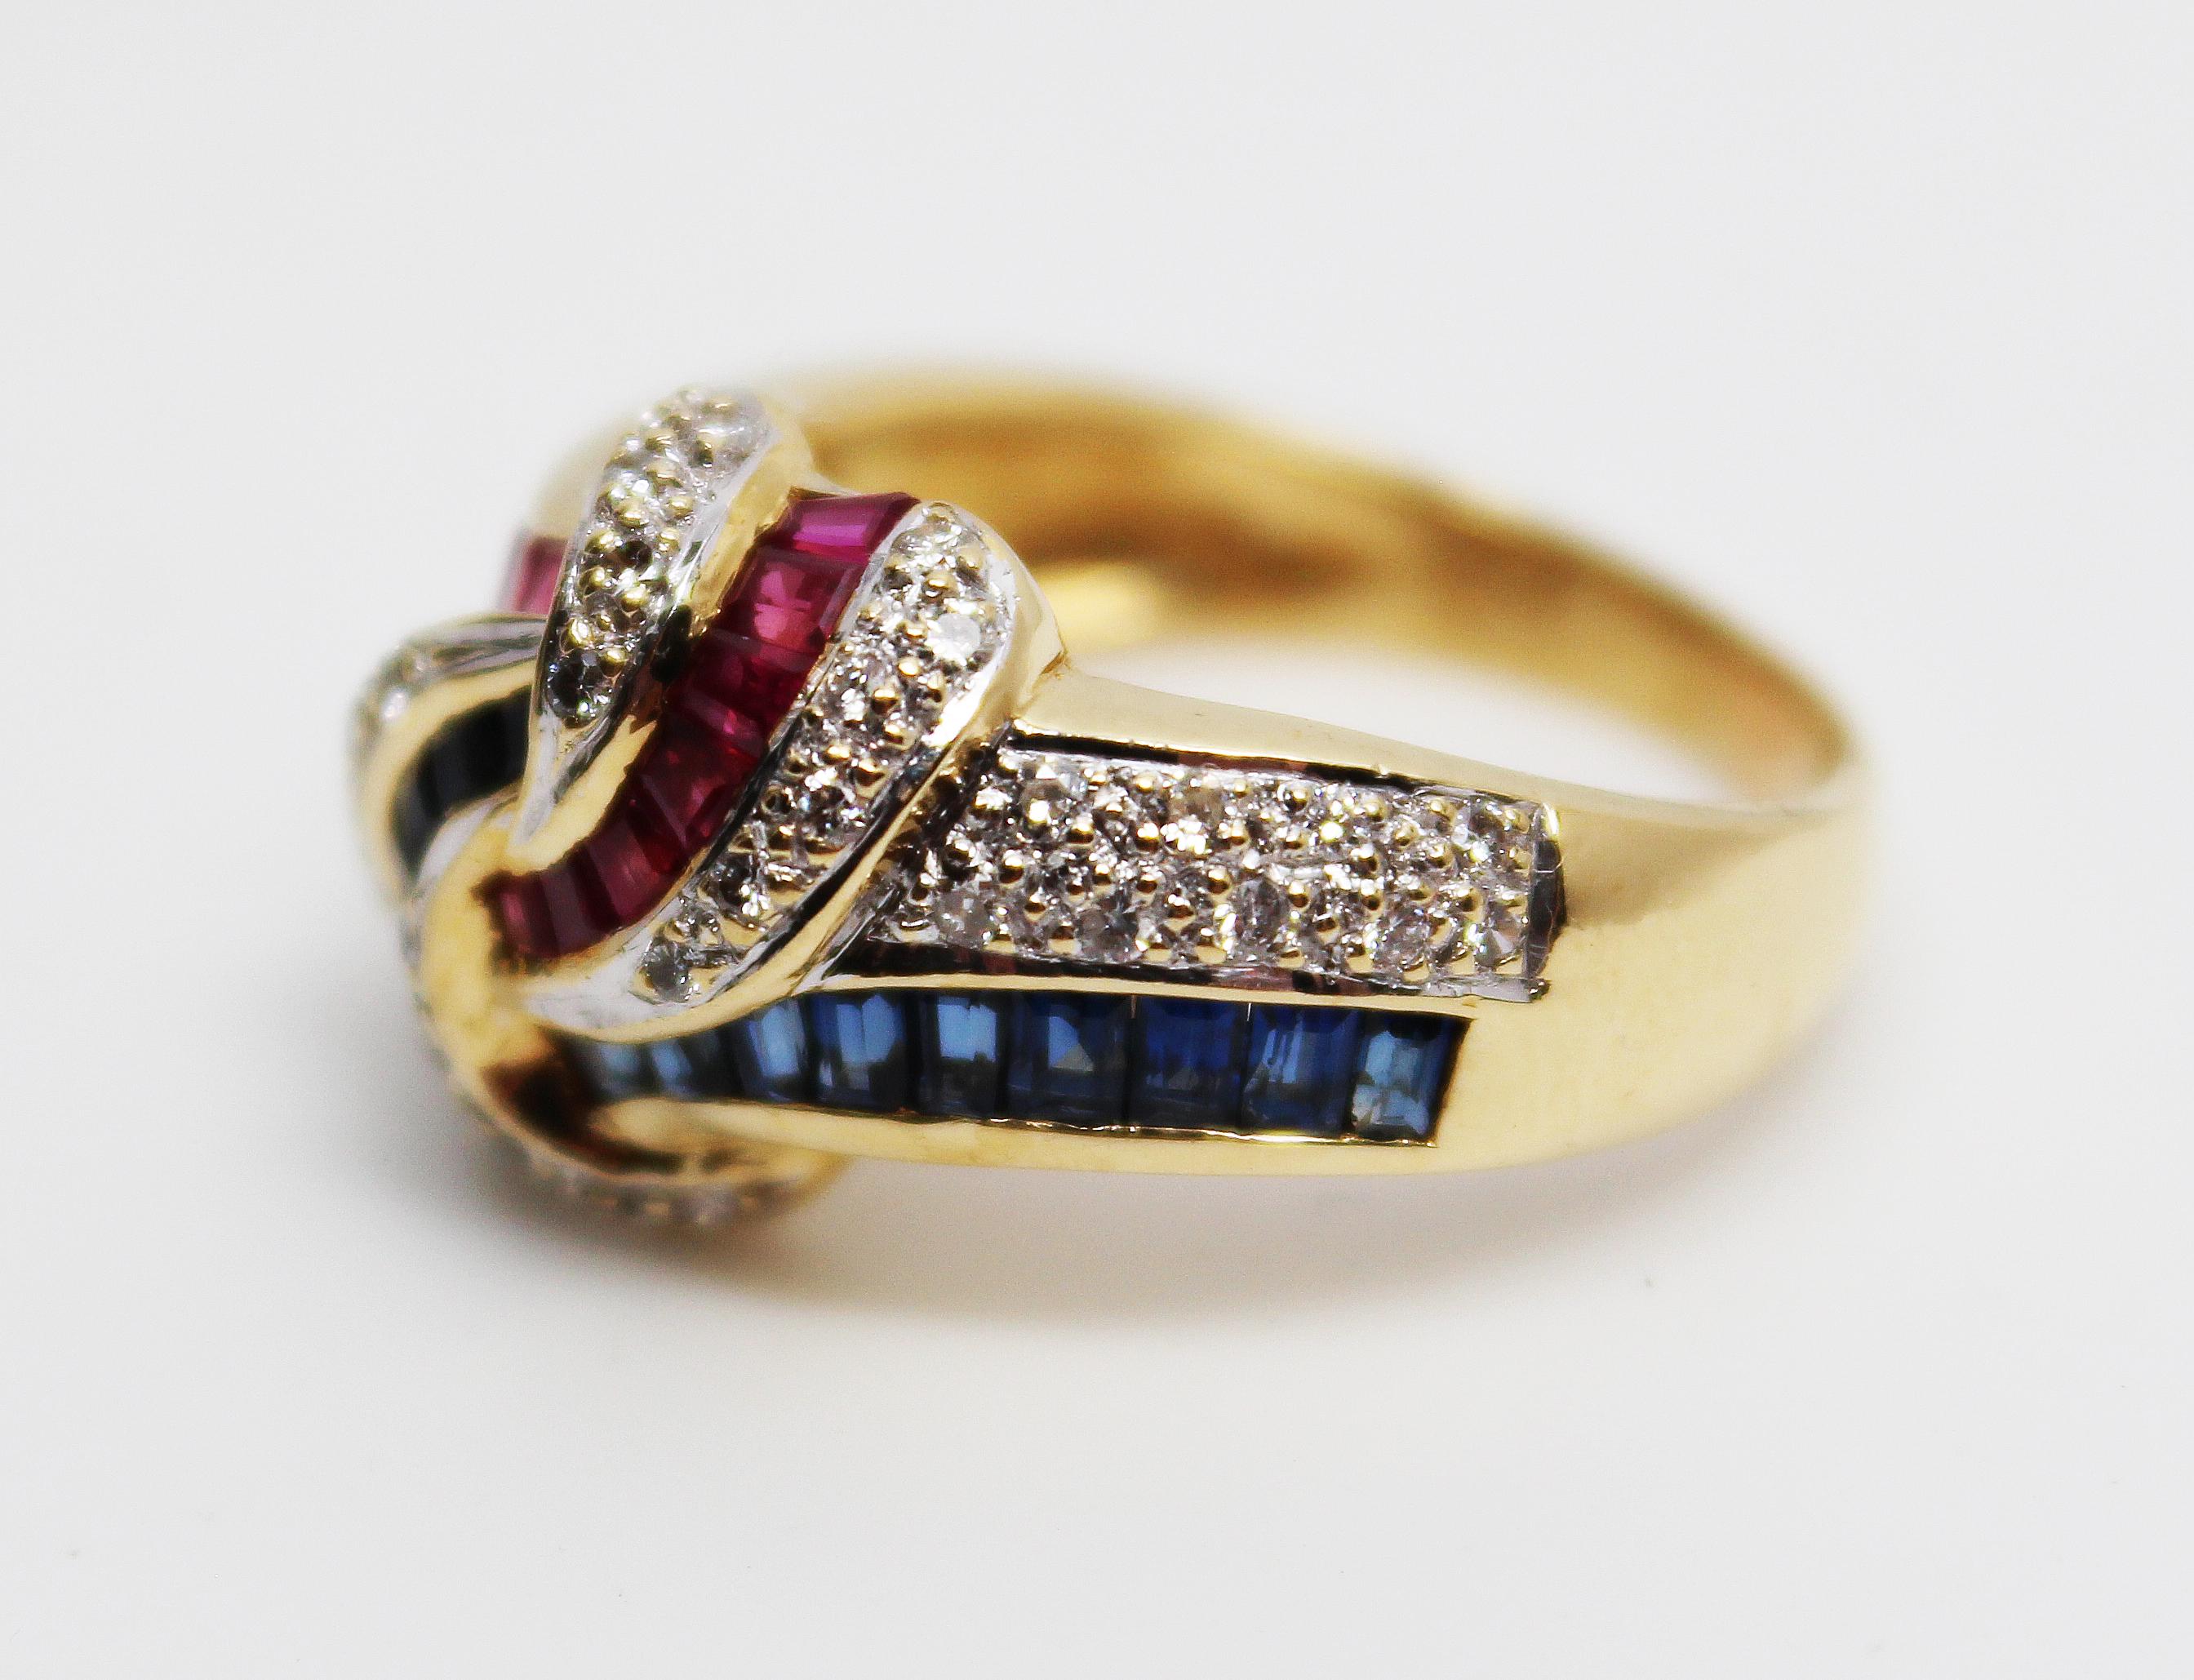 This is a stunning statement ring in 18k yellow gold featuring a bold knot design set with deep red rubies, rich blue sapphires, and sparkling white diamonds. The excellent combination of colored stones paired with the unique knot design makes this